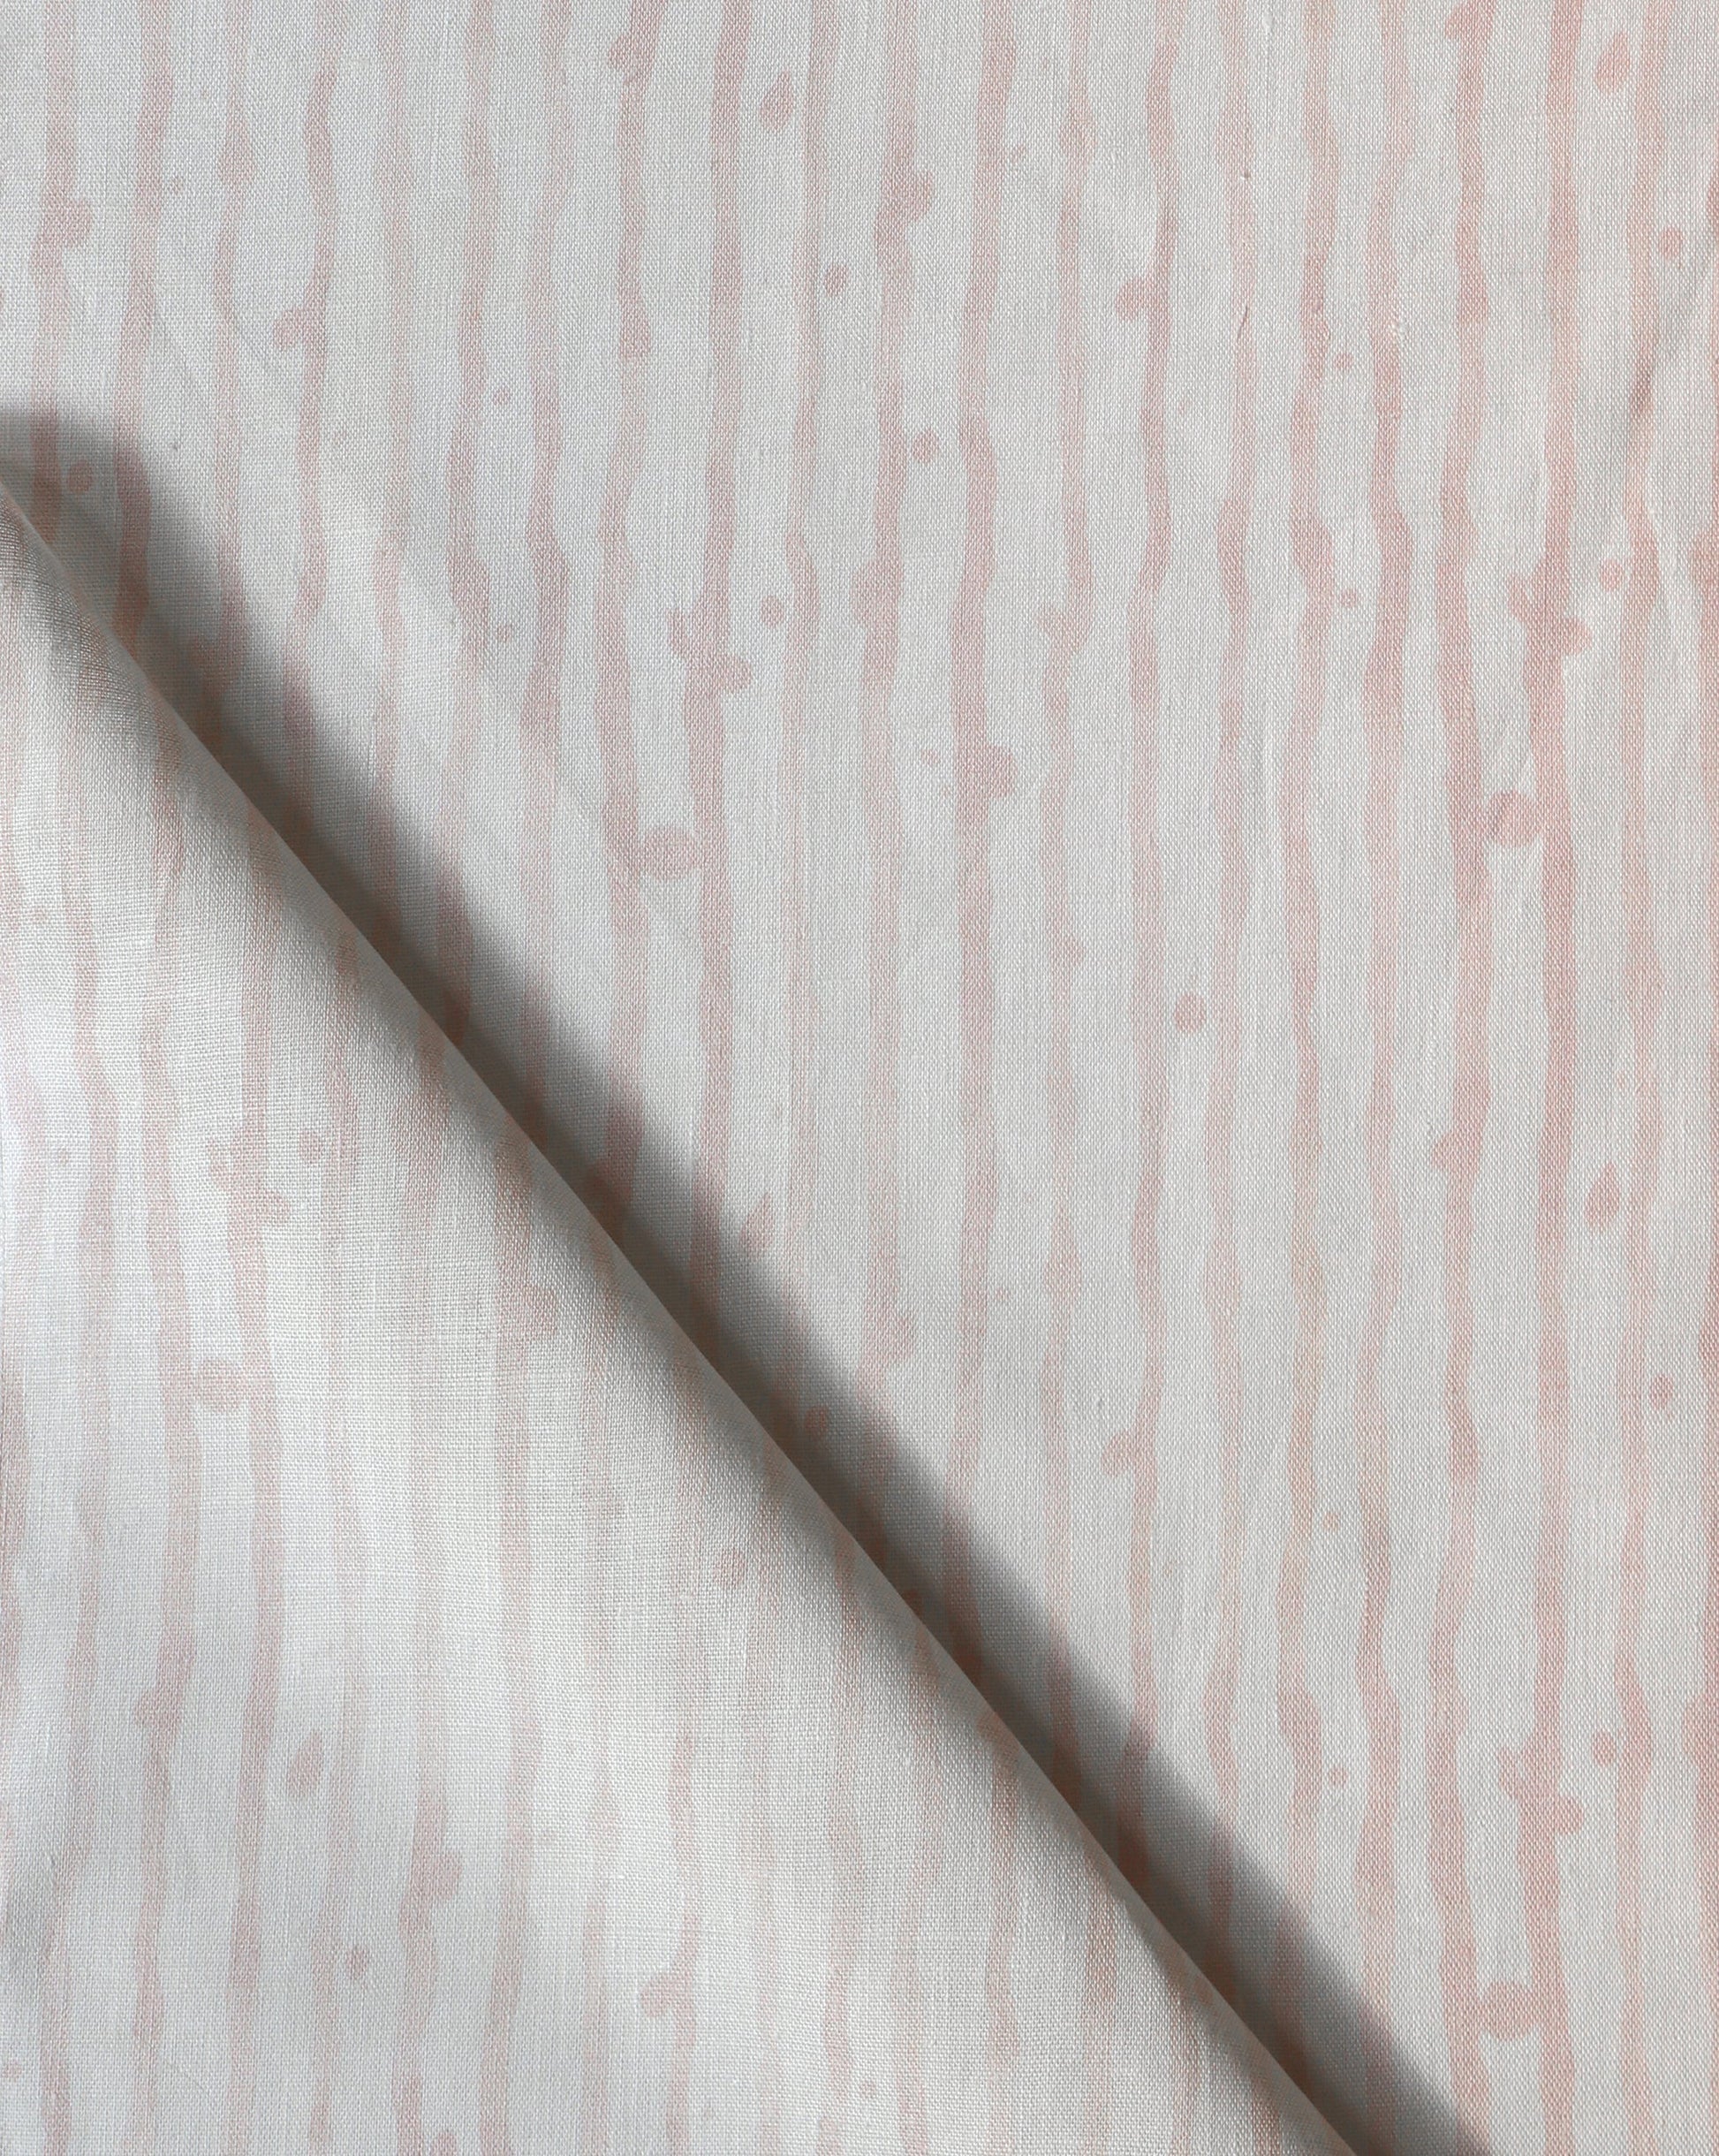 A Drippy Stripe Fabric Coral on a white surface